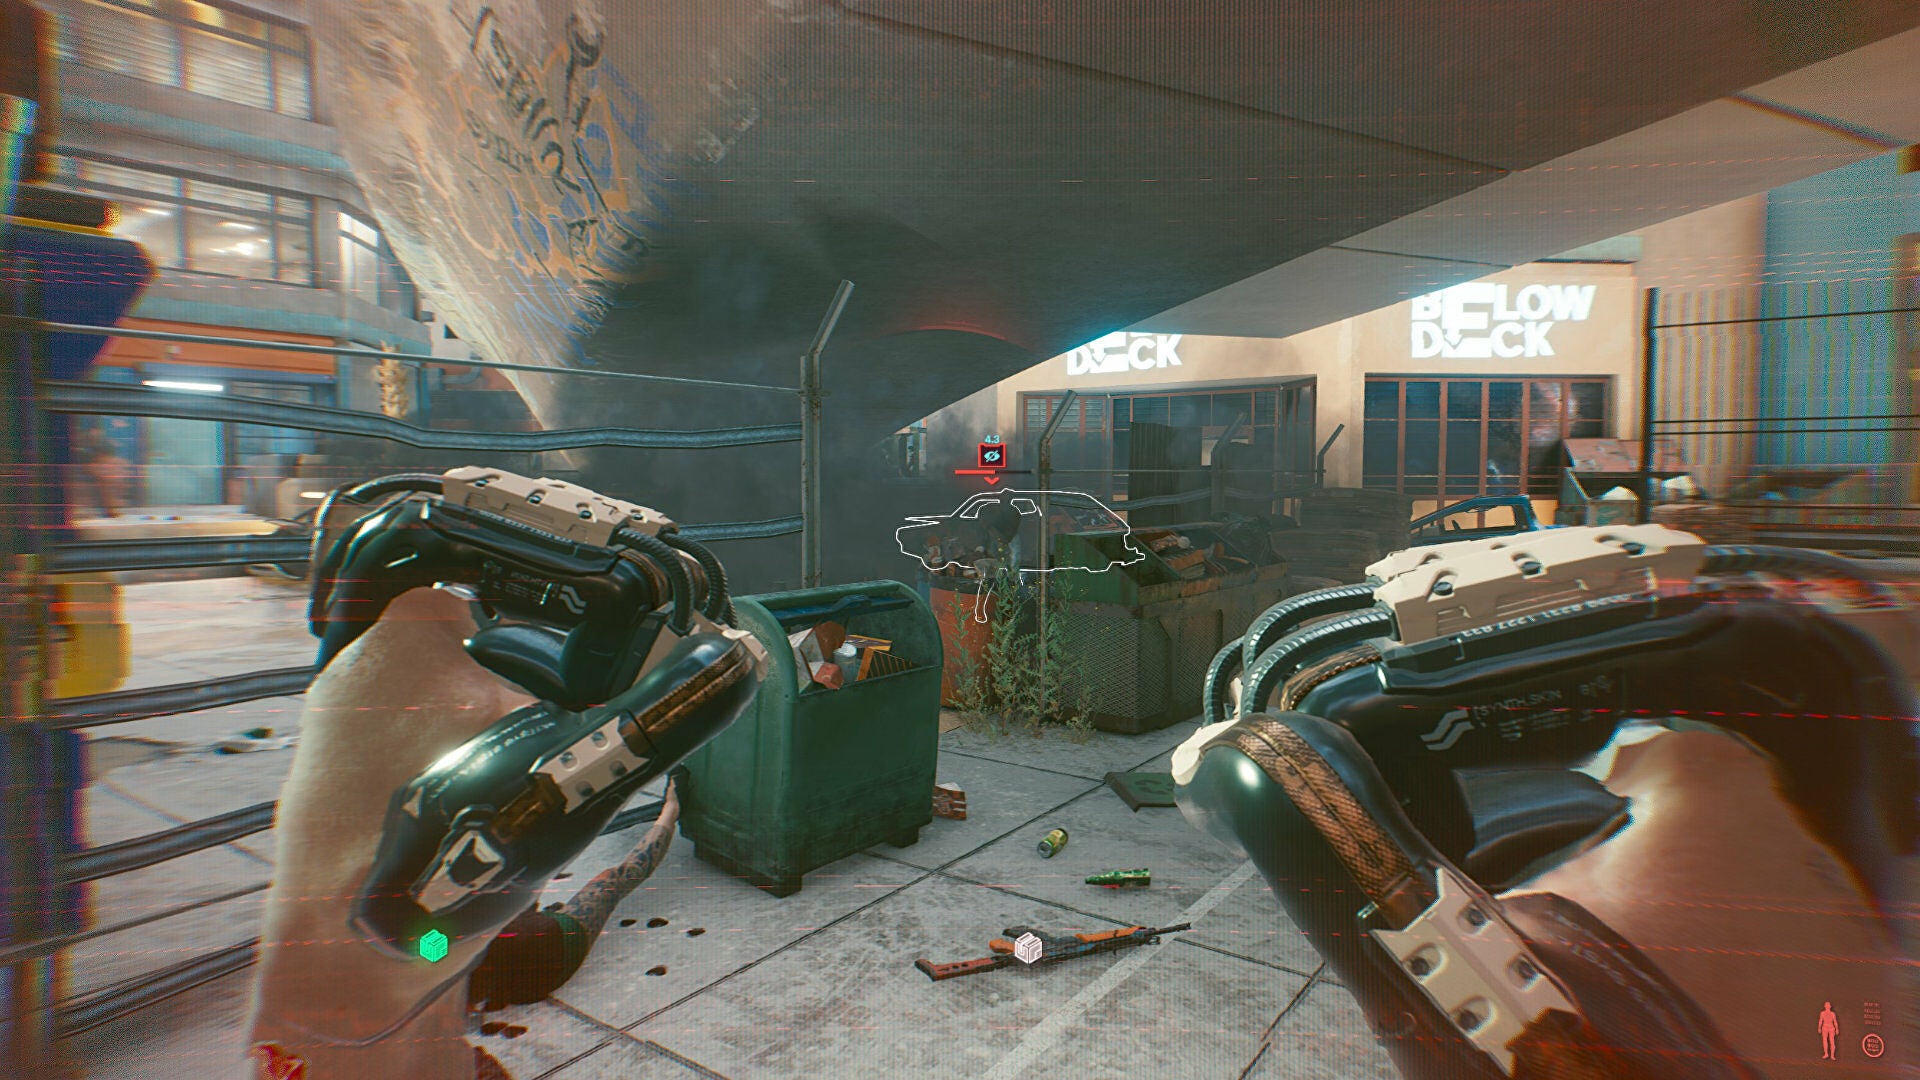 The player holds up their Gorilla Arms on the street in Cyberpunk 2077.